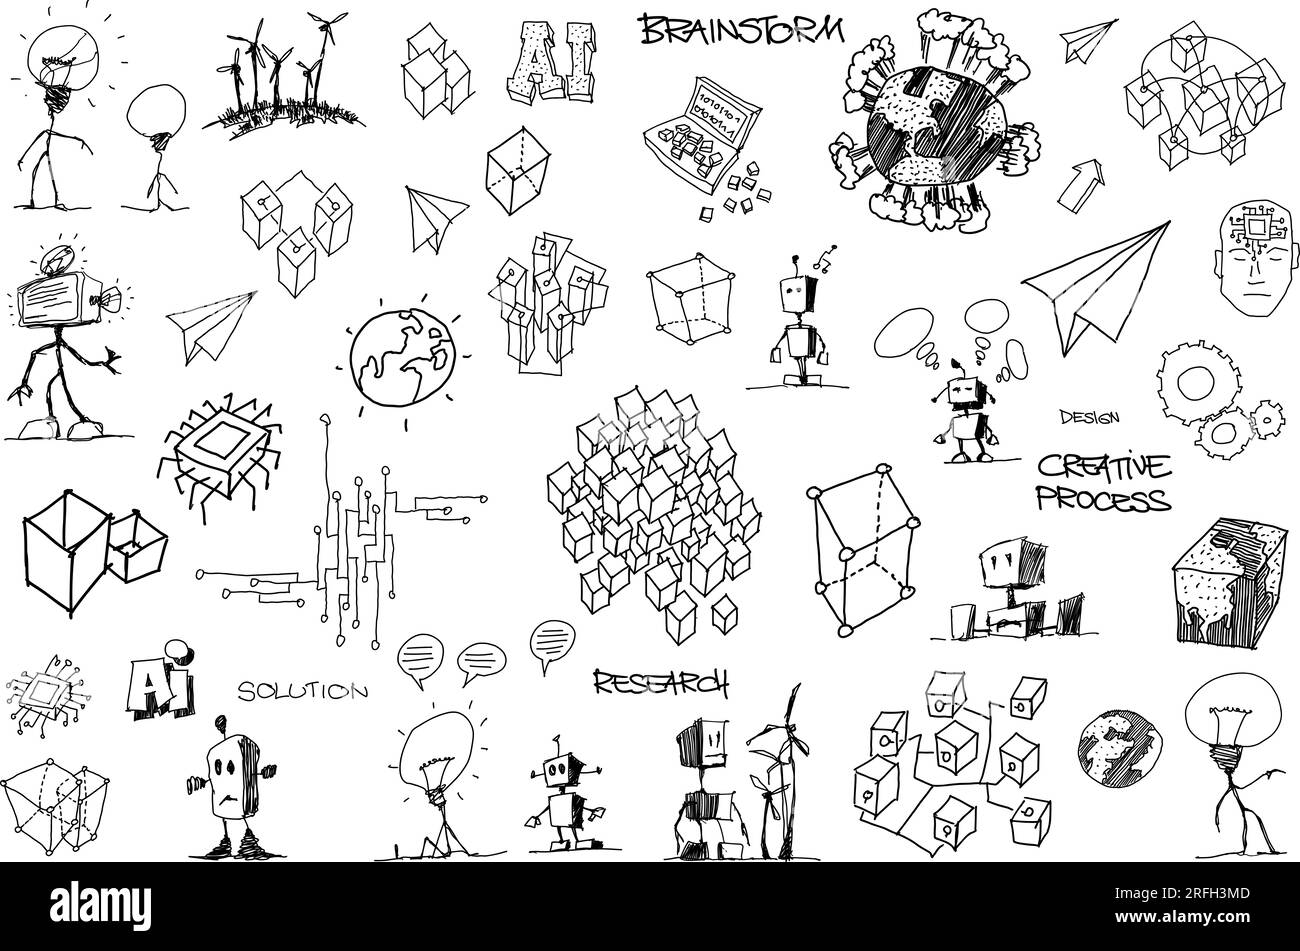 hand drawn architectural sketches of artificial intelligence topics and robots and future and science topics and machine learning and circuits Stock Photo